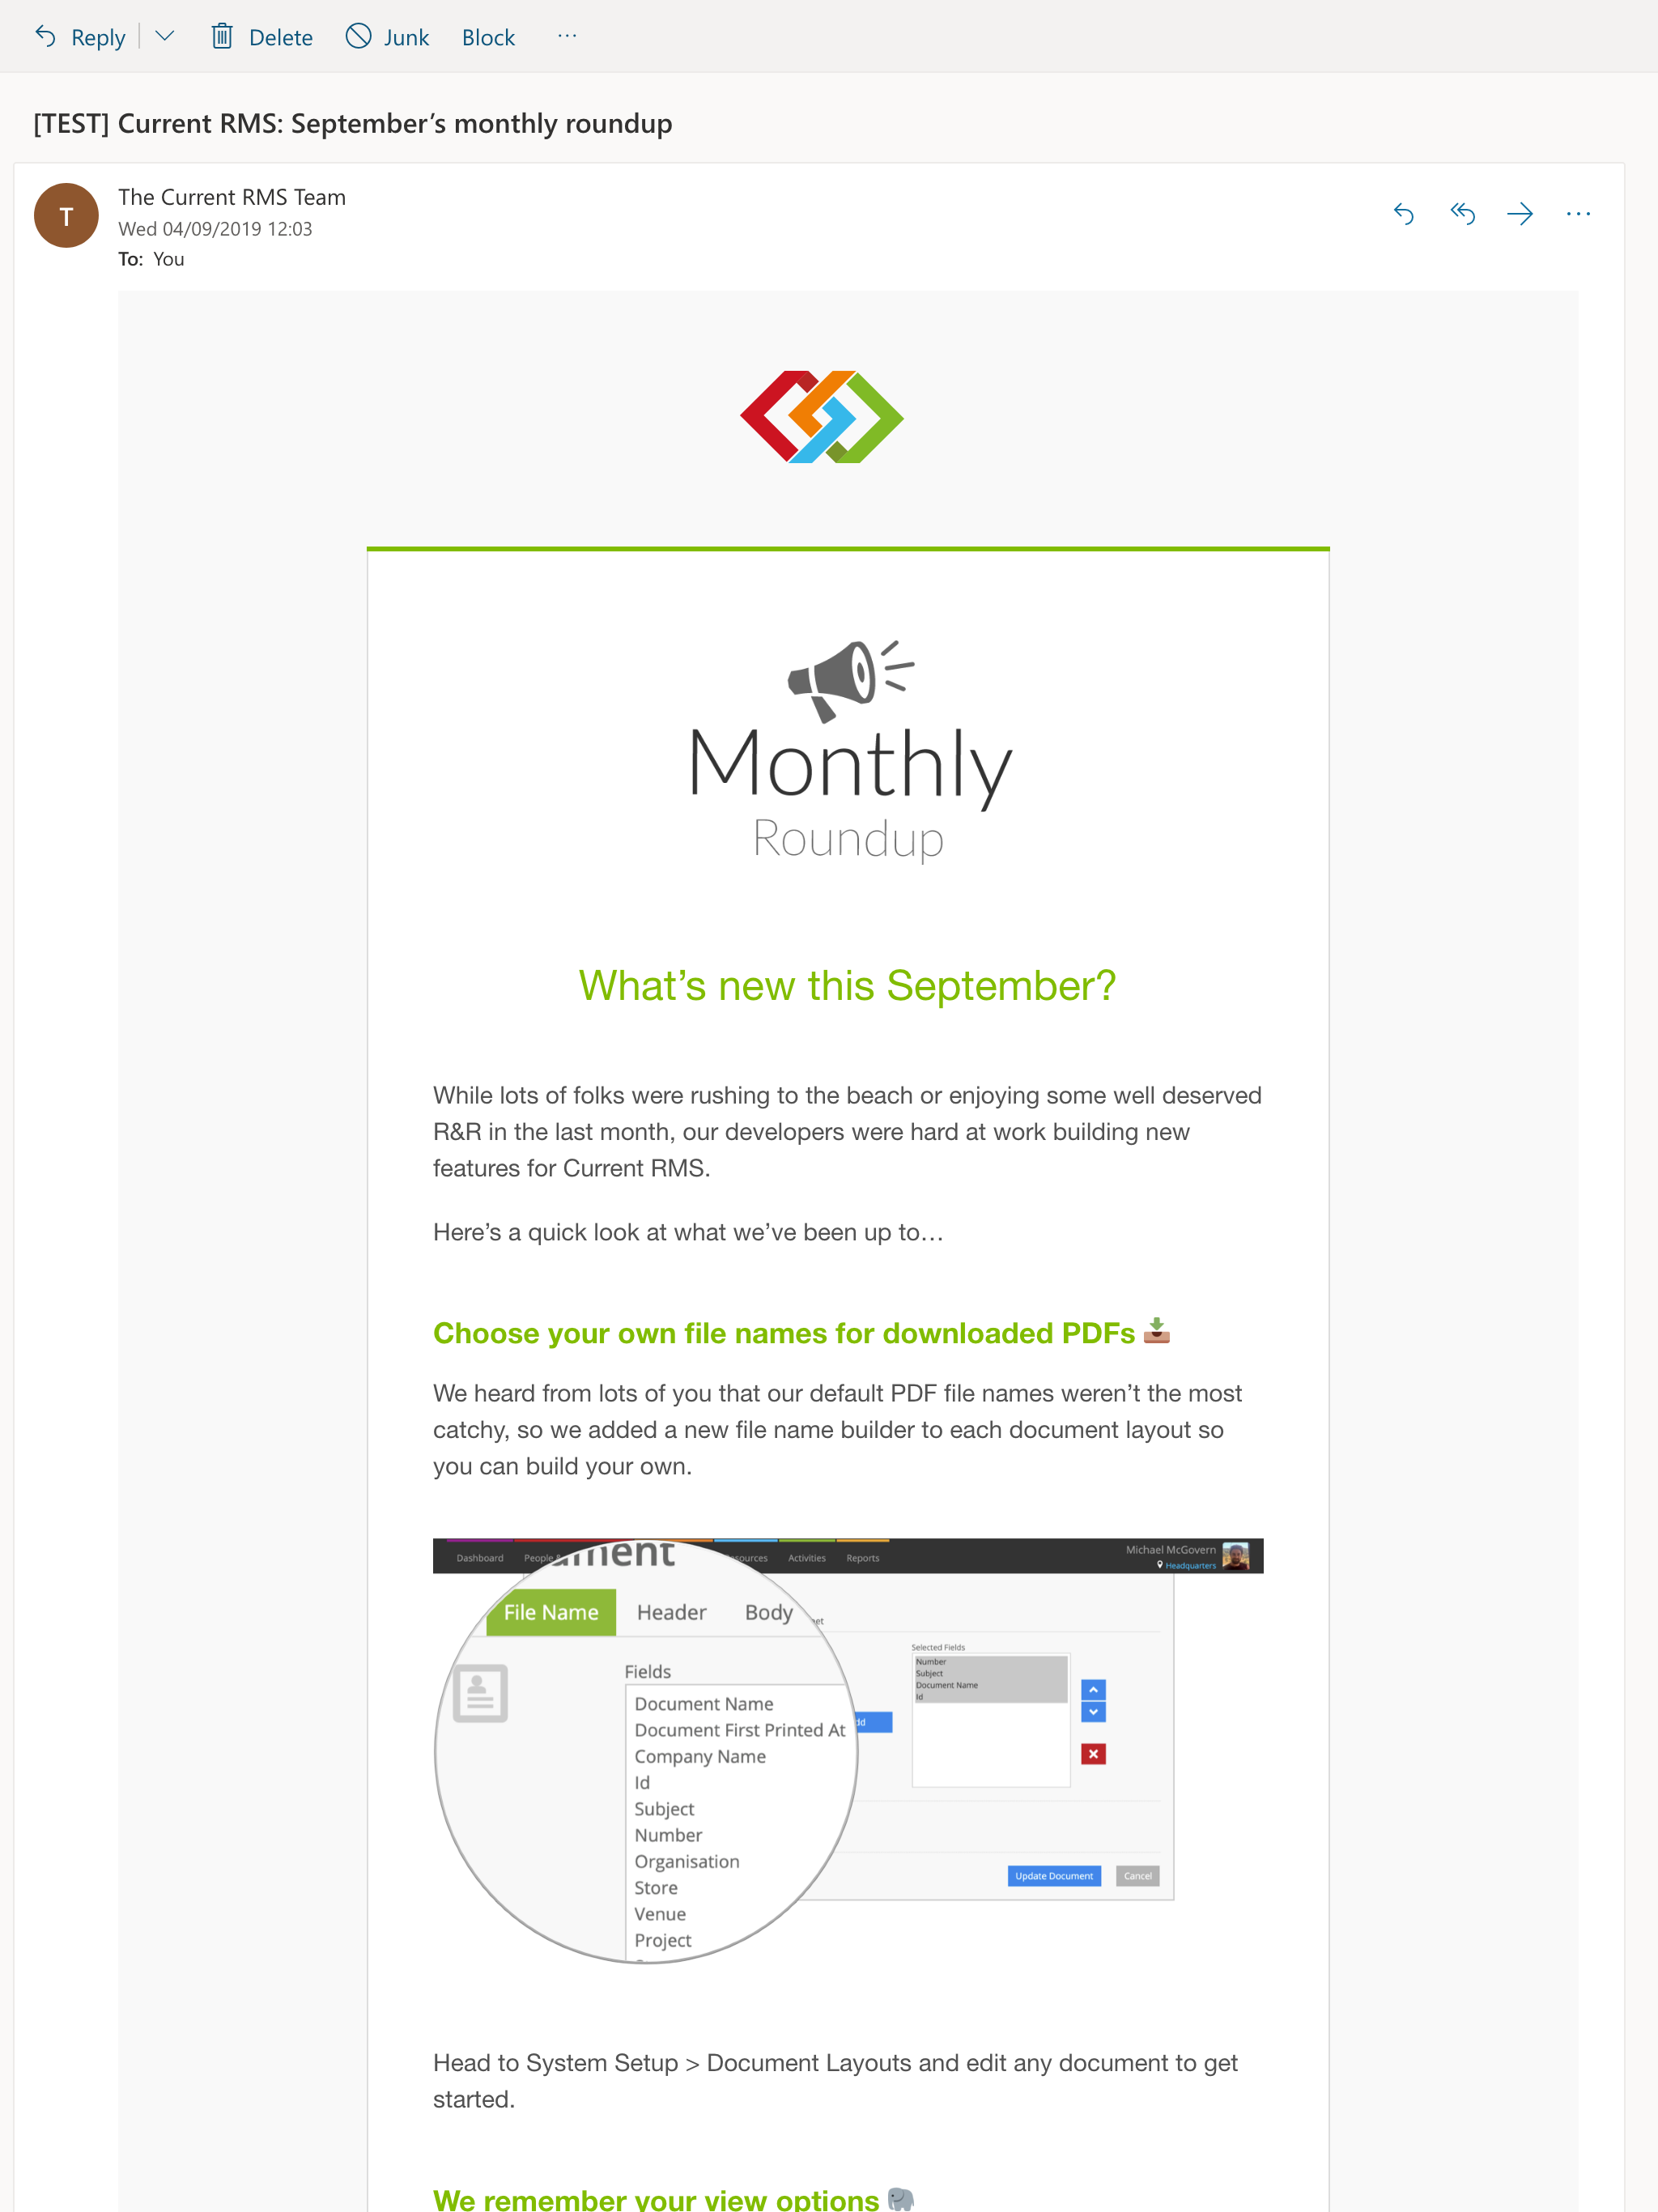 Screenshot of Monthly Roundup email from September